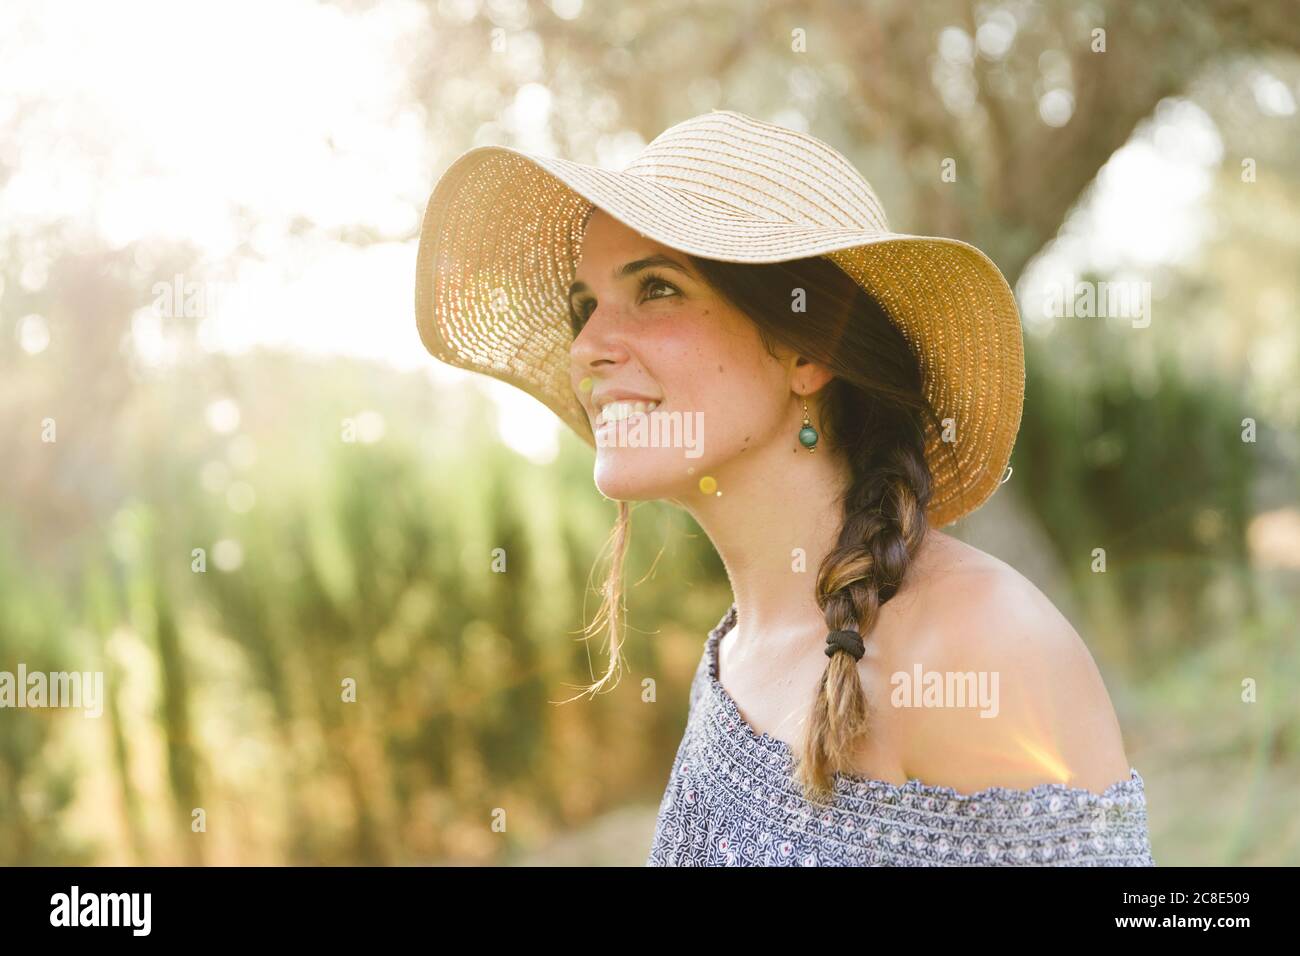 Thoughtful young woman wearing sun hat during sunny day Stock Photo